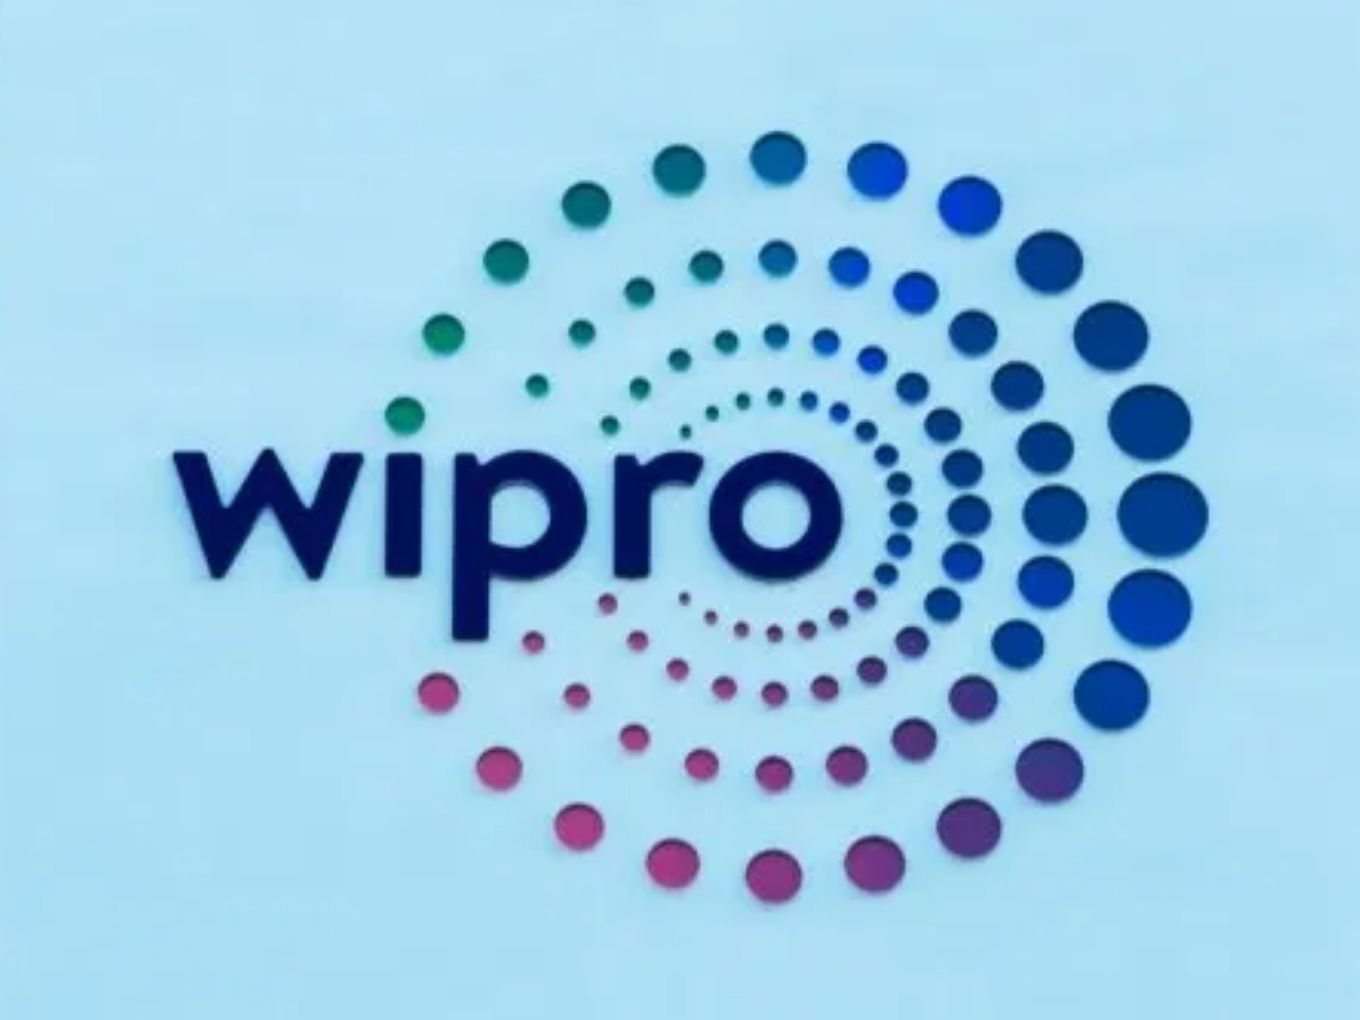 Wipro-Backed Fund To Invest In 10 Retail Startups